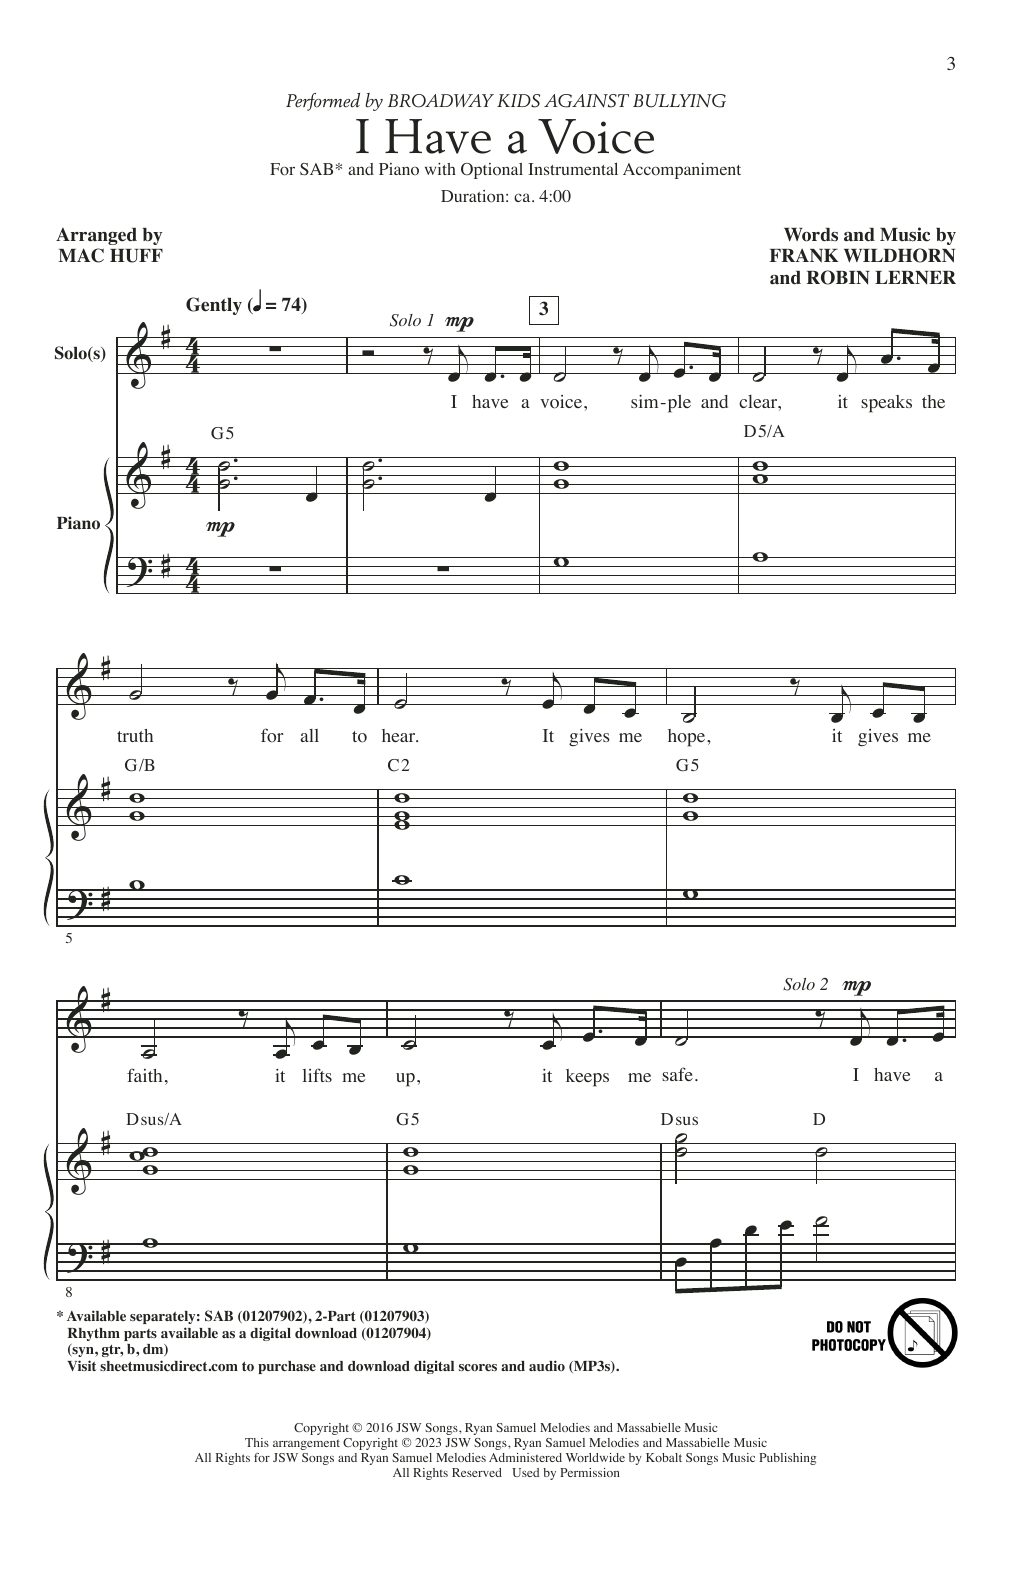 Download Broadway Kids Against Bullying I Have A Voice (arr. Mac Huff) Sheet Music